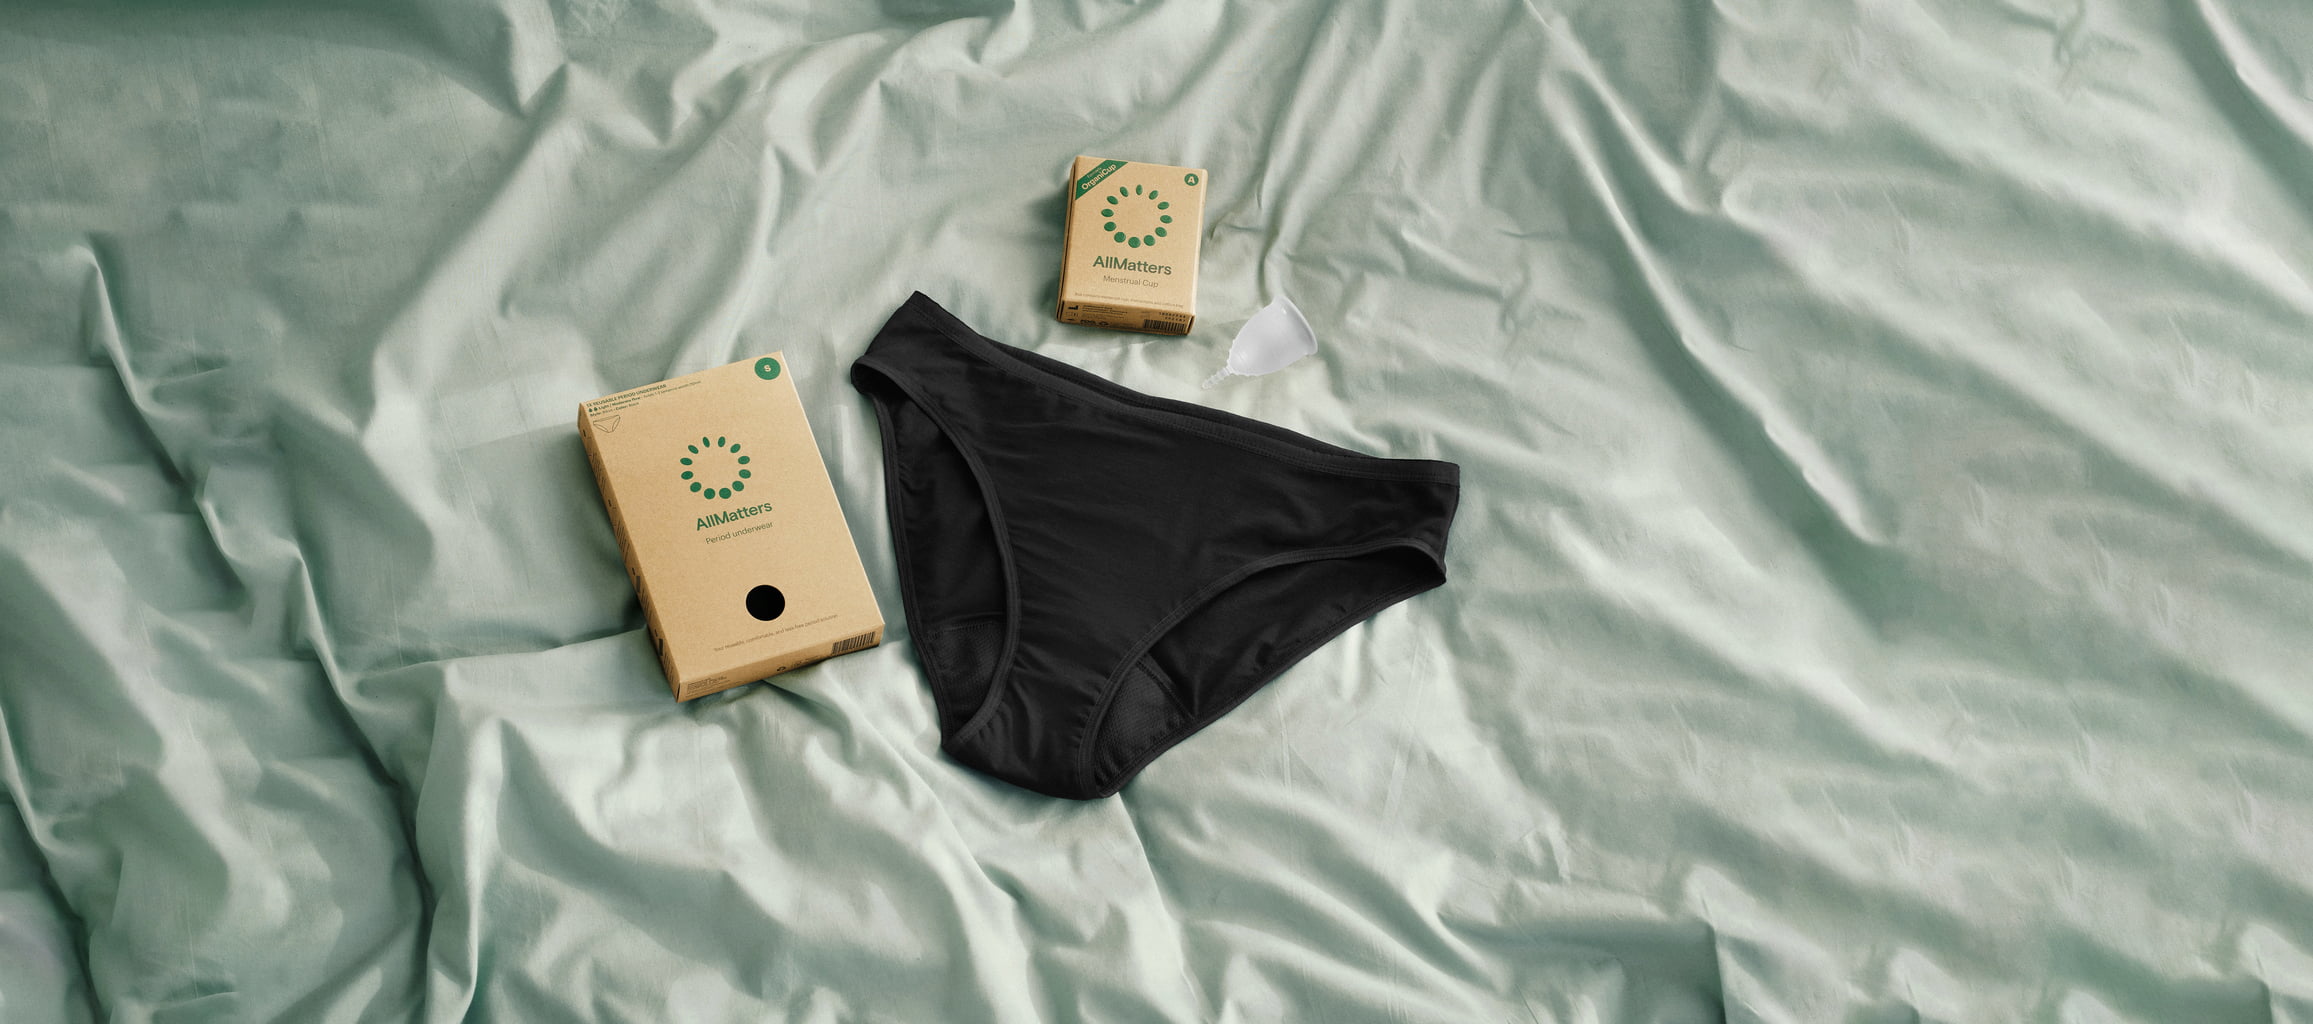 Period Panties Thong – Lunette Menstrual Cups